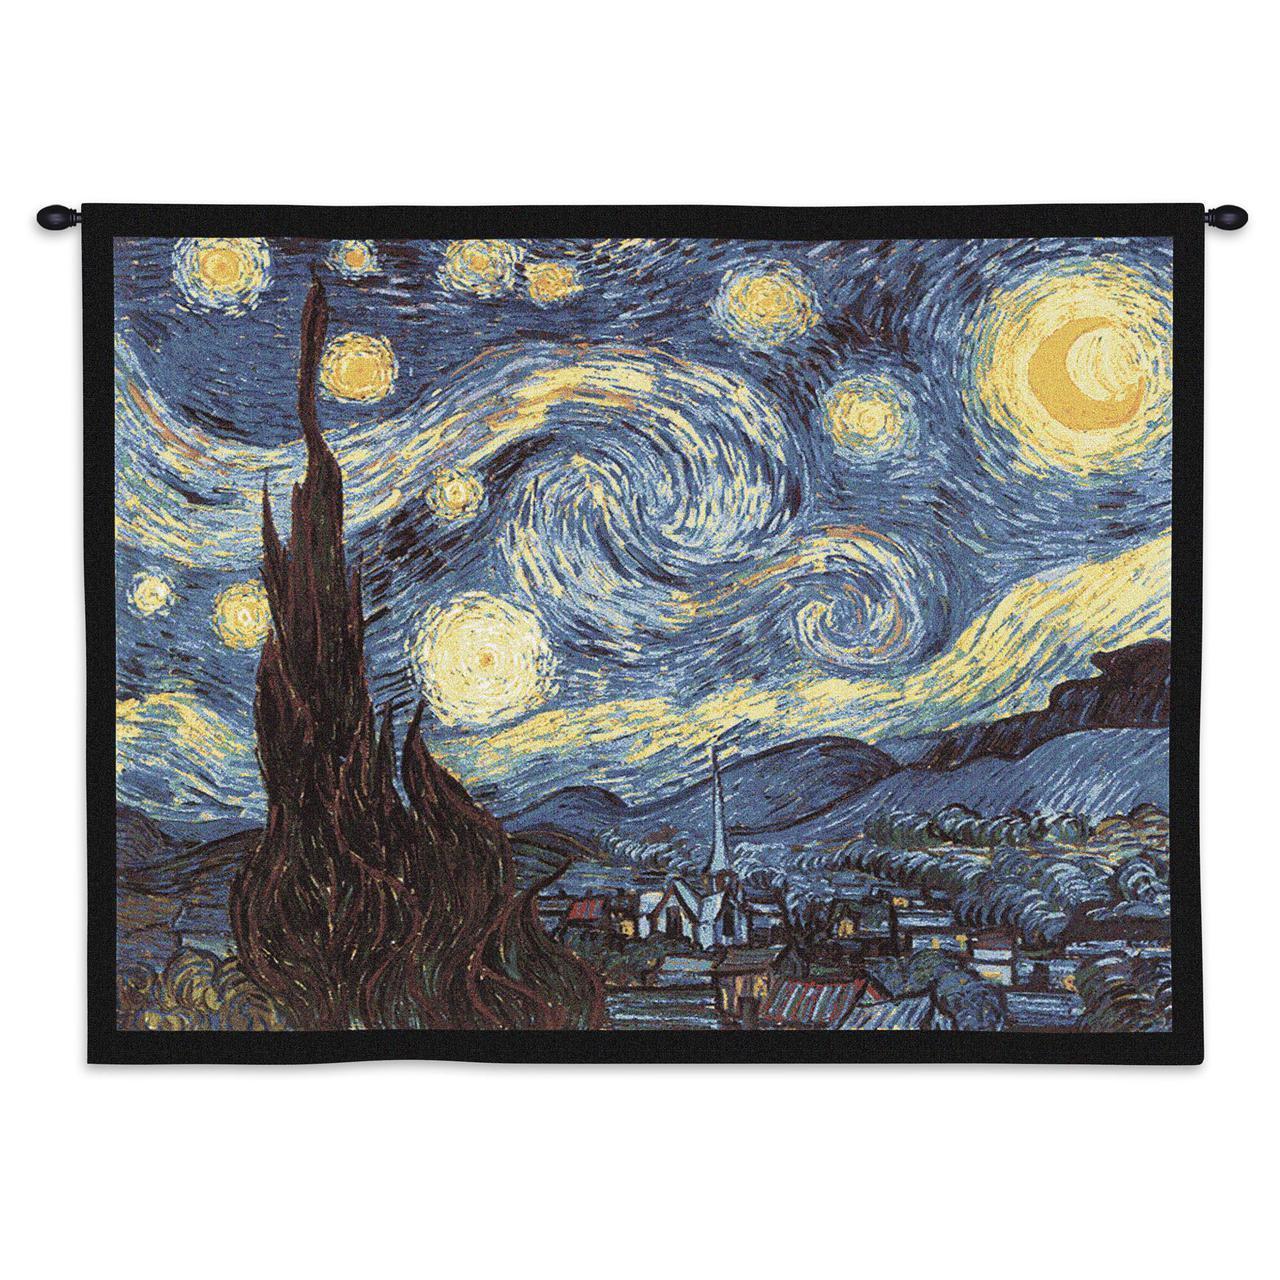 34x26 STARRY NIGHT Van Gogh Abstract Wall Hanging  - $82.00